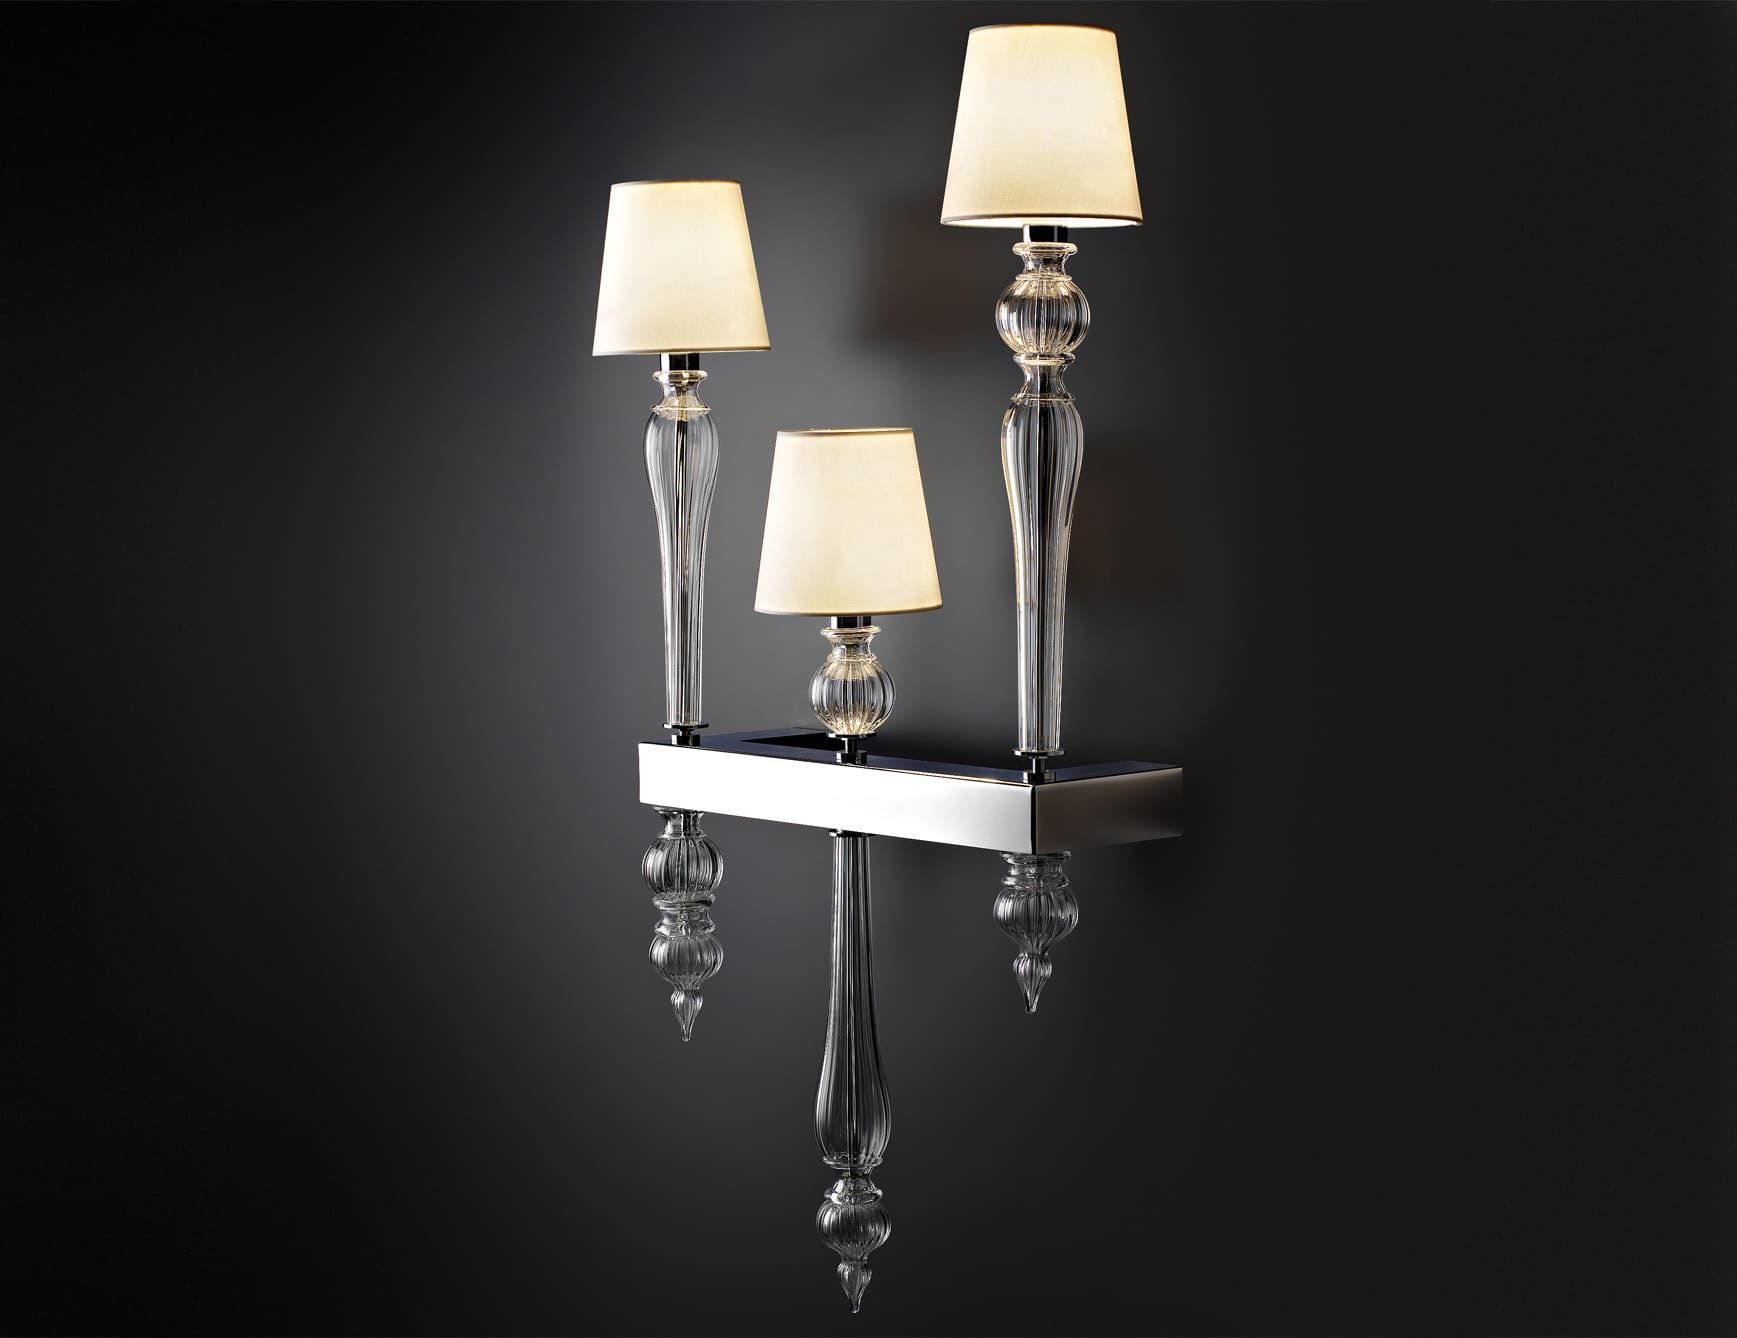 Dandy modern Italian sconce with clear glass